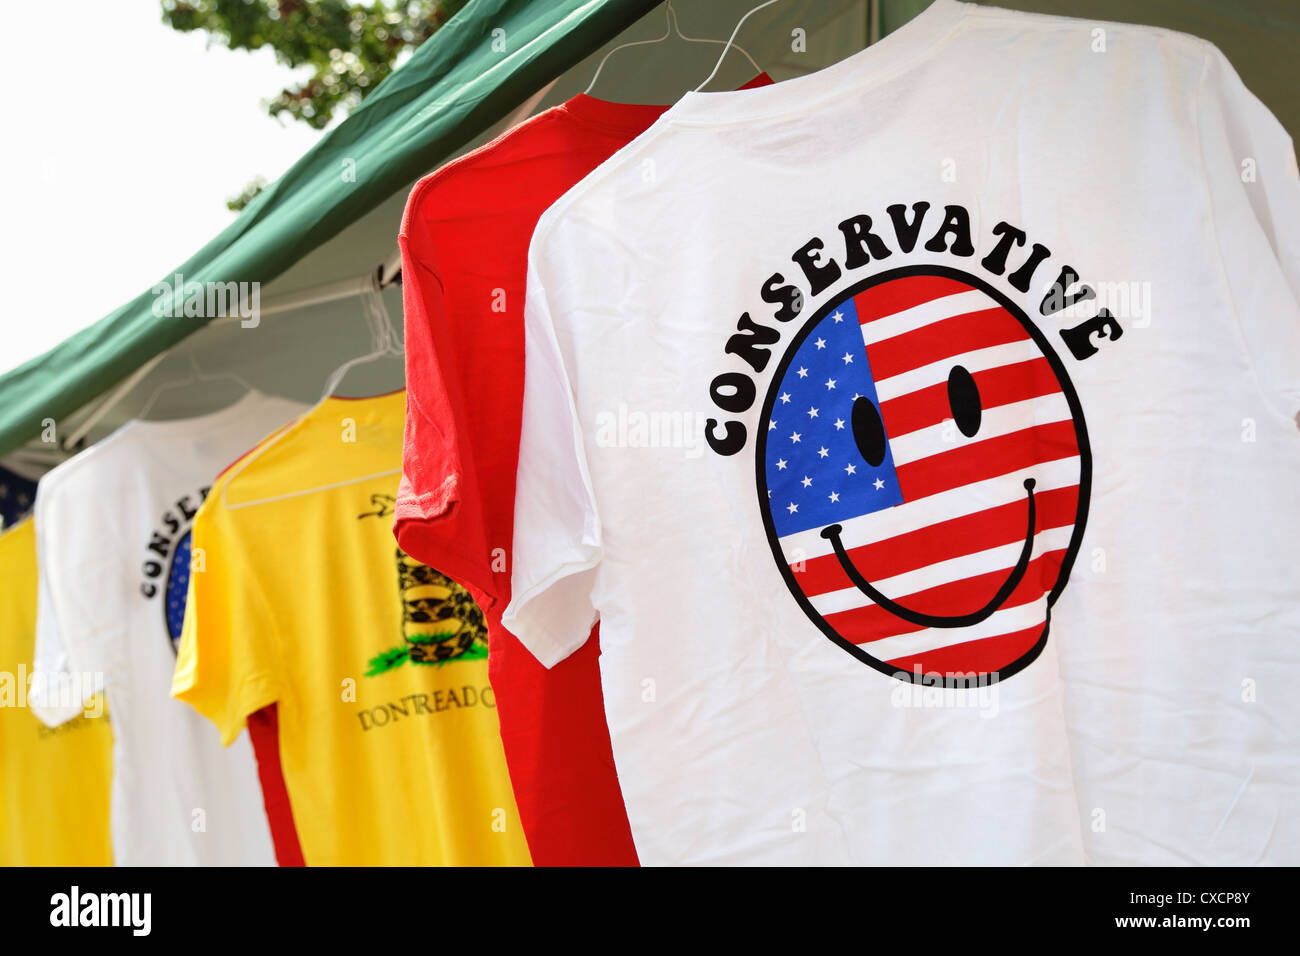 Conservative T-shirts for sale at the Fun Fourth Festival on Independence Day 2012  in Greensboro, North Carolina, USA Stock Photo